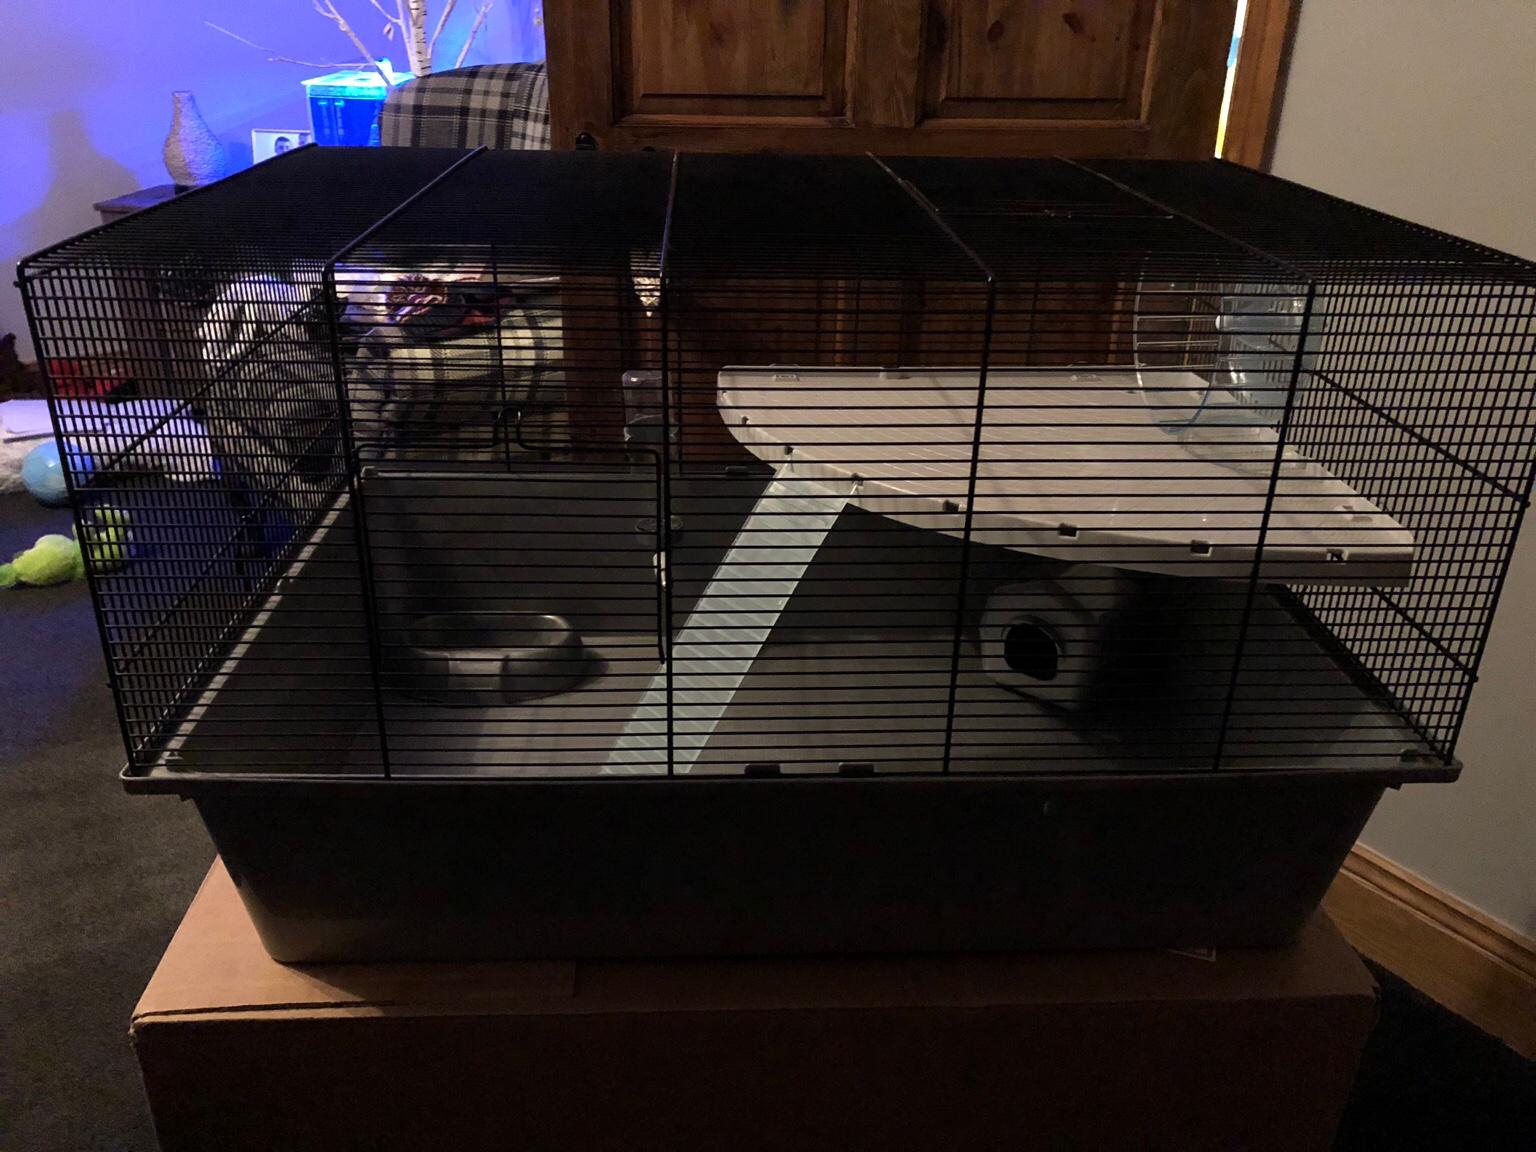 large hamster cage